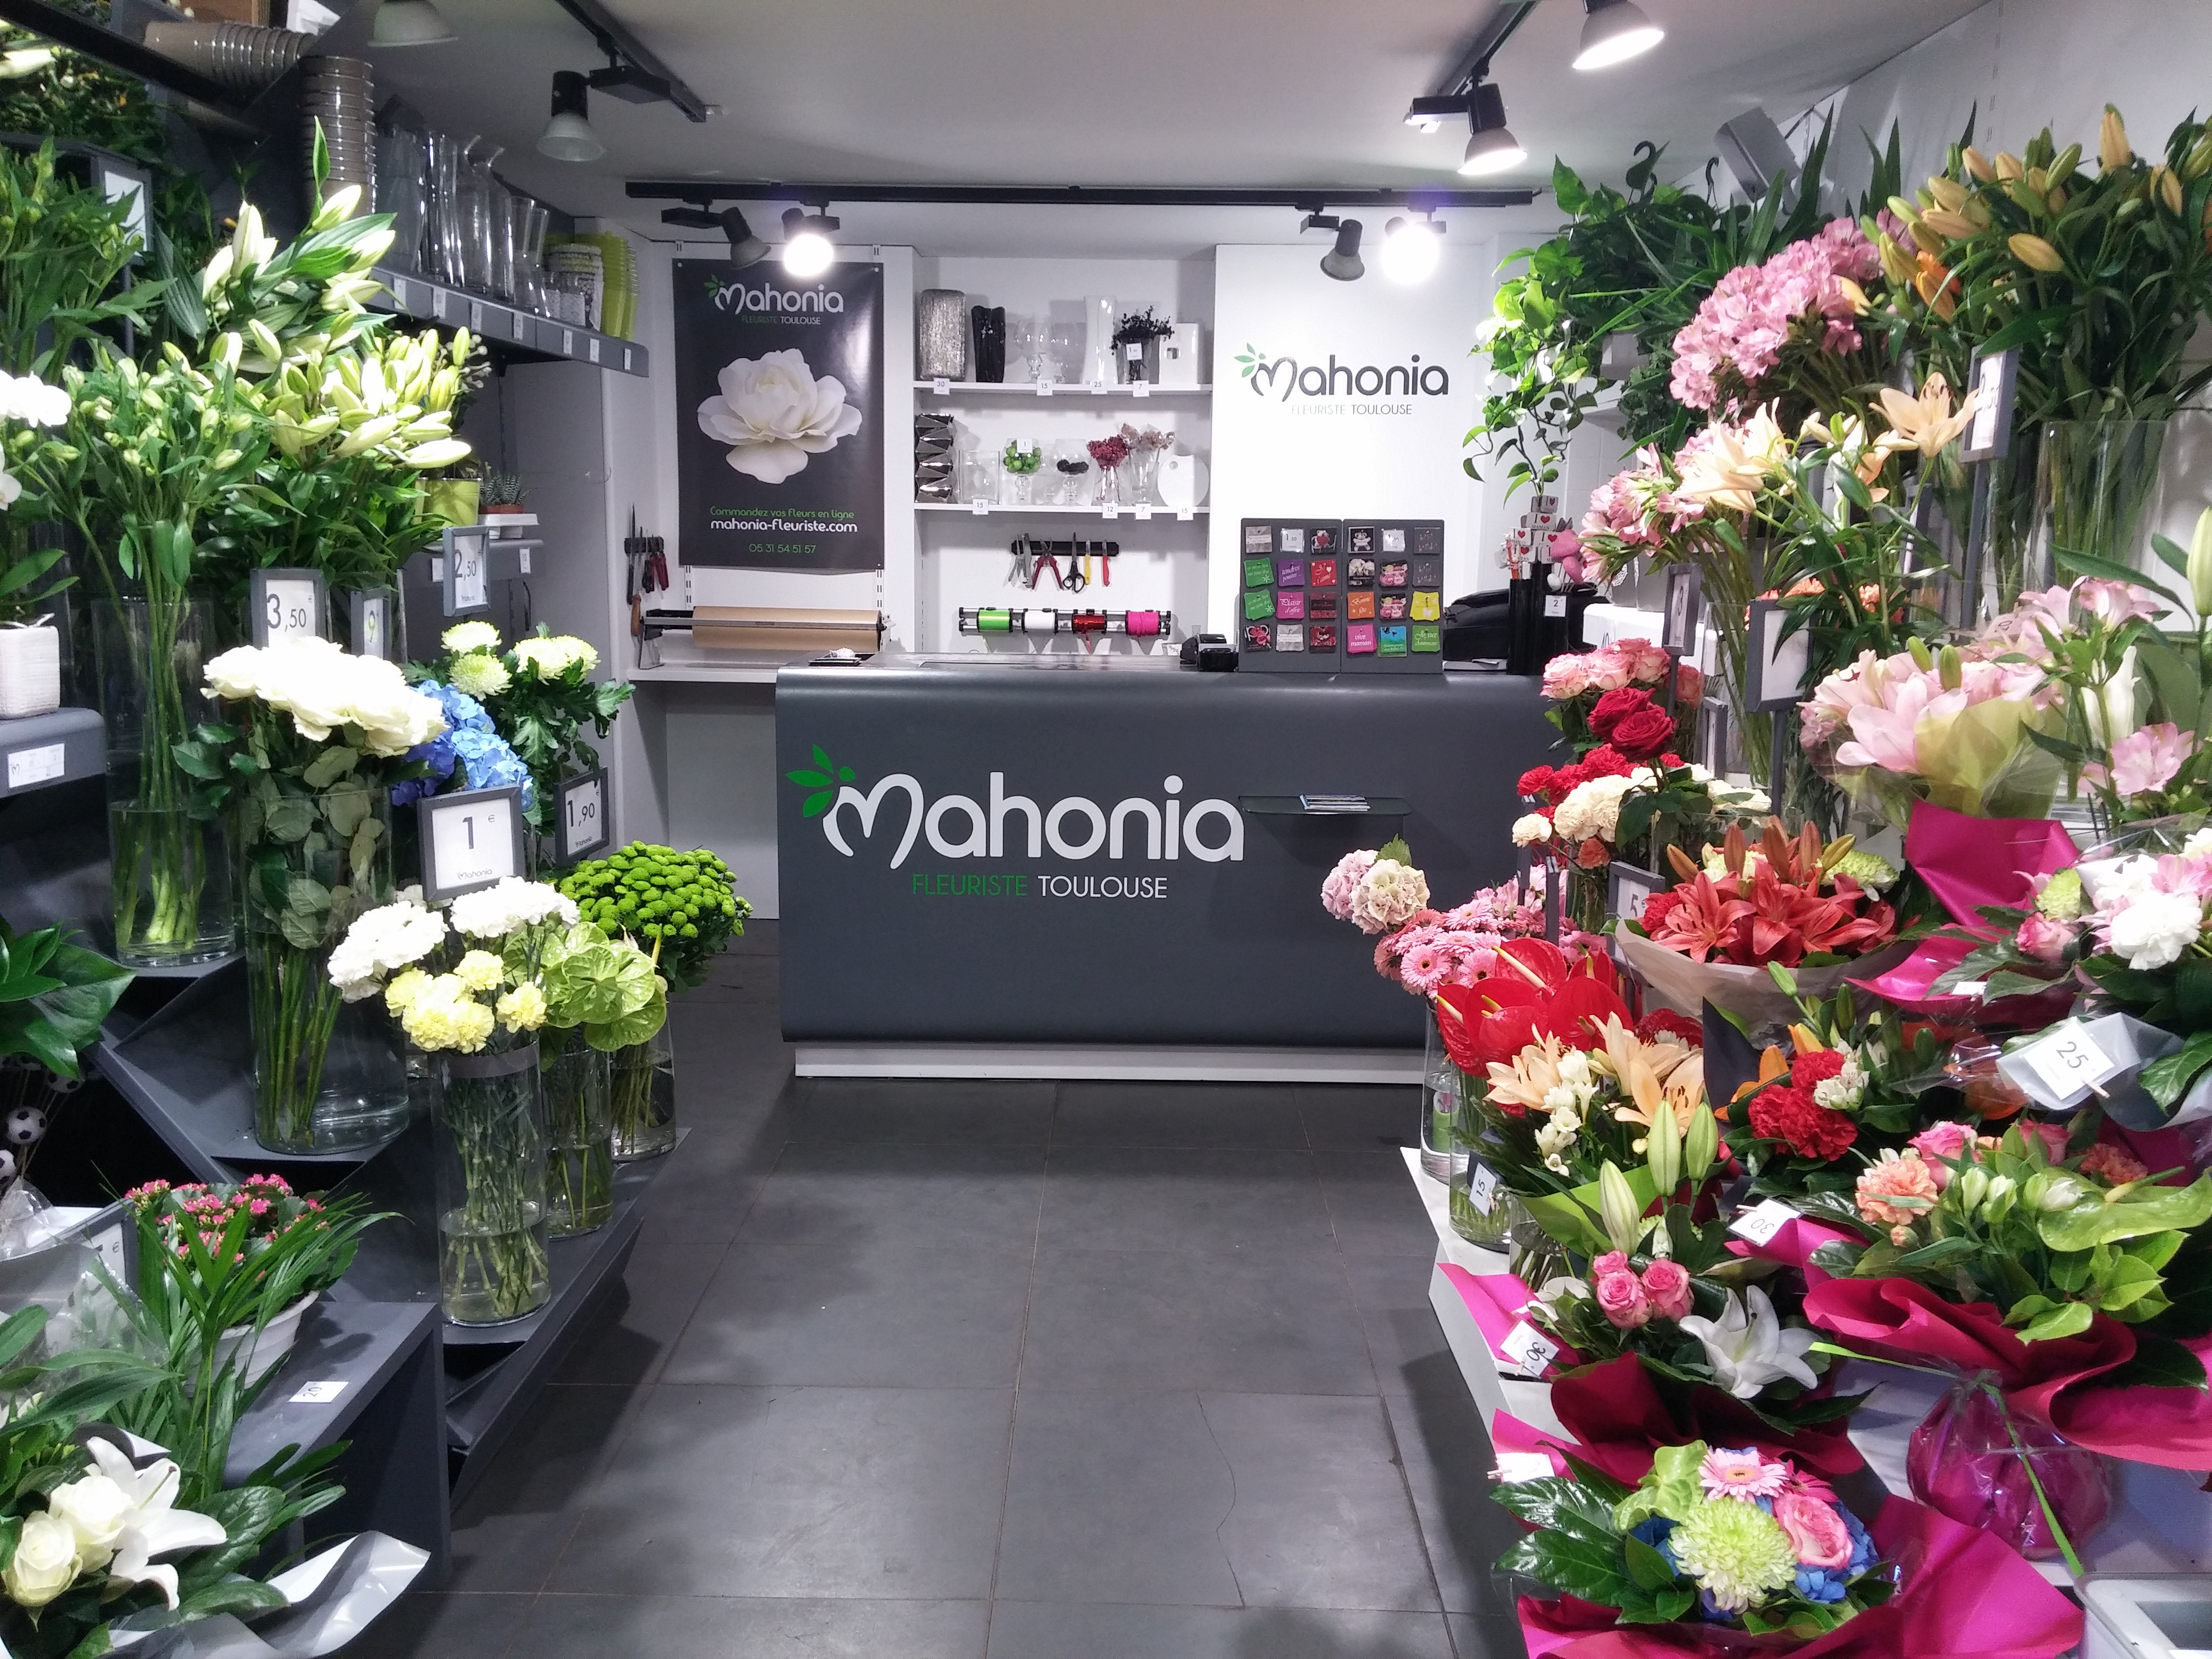 fleuriste professionnelle mahonia toulouse orchidees lys roses